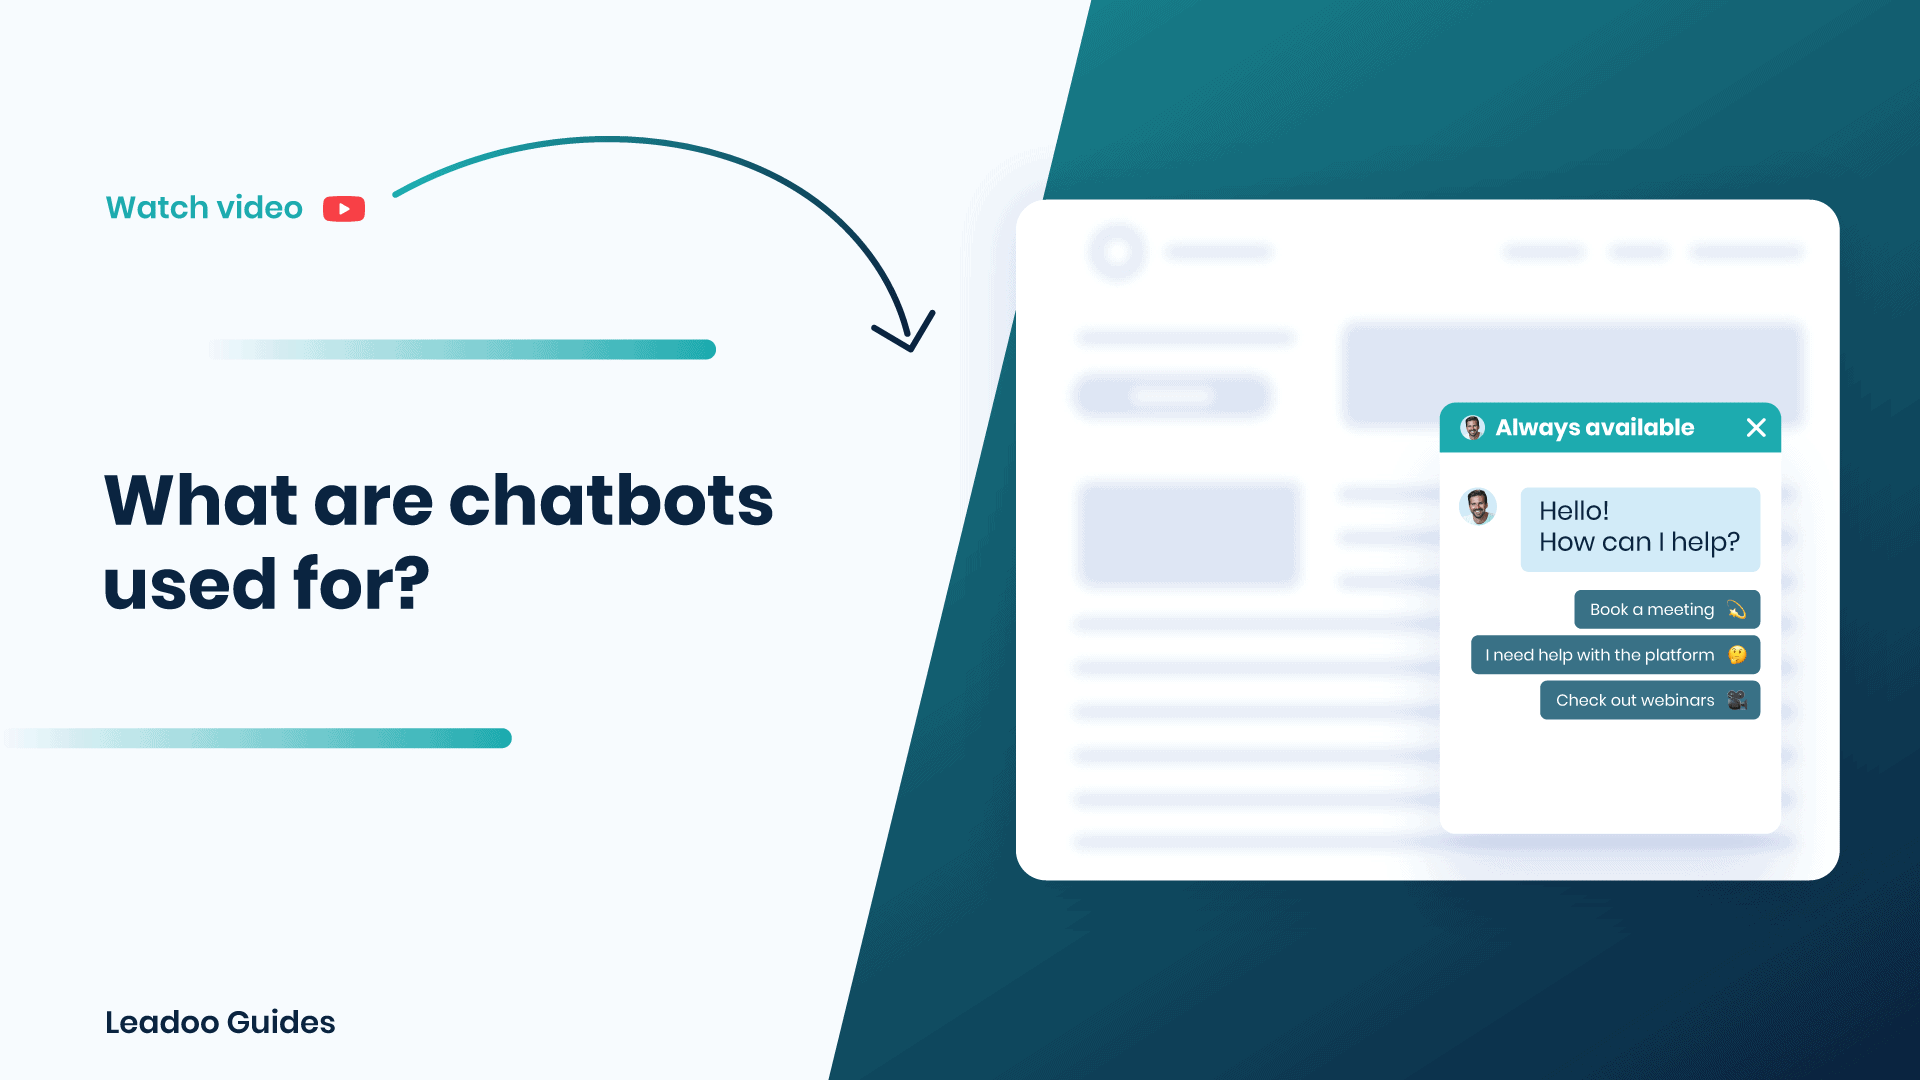 What are chatbots used for what are chatbots used for What are chatbots used for?